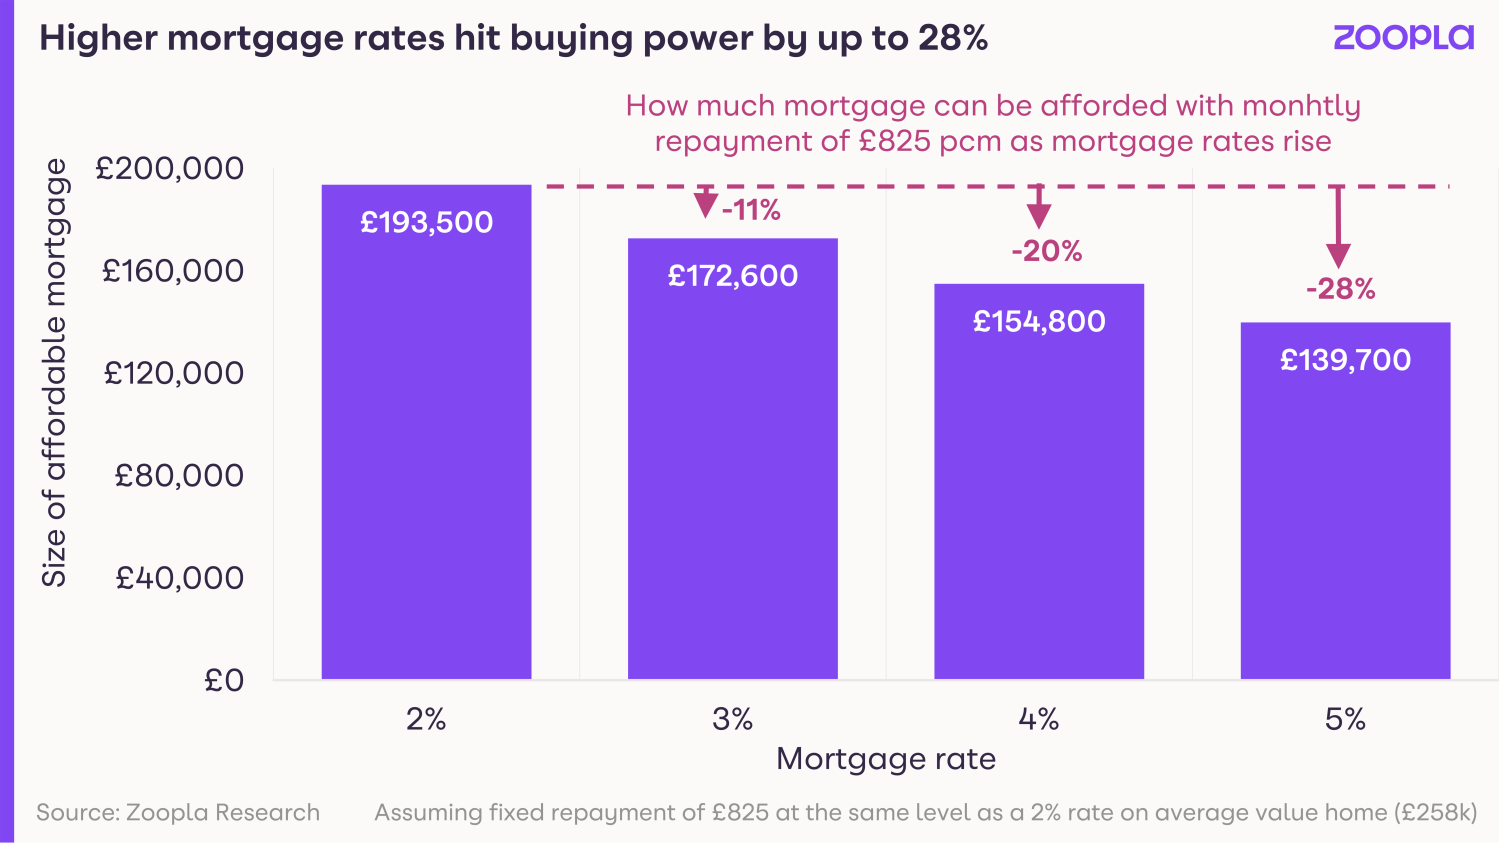 HPI September 2022: higher mortgage rates hit buying power by up to 28%